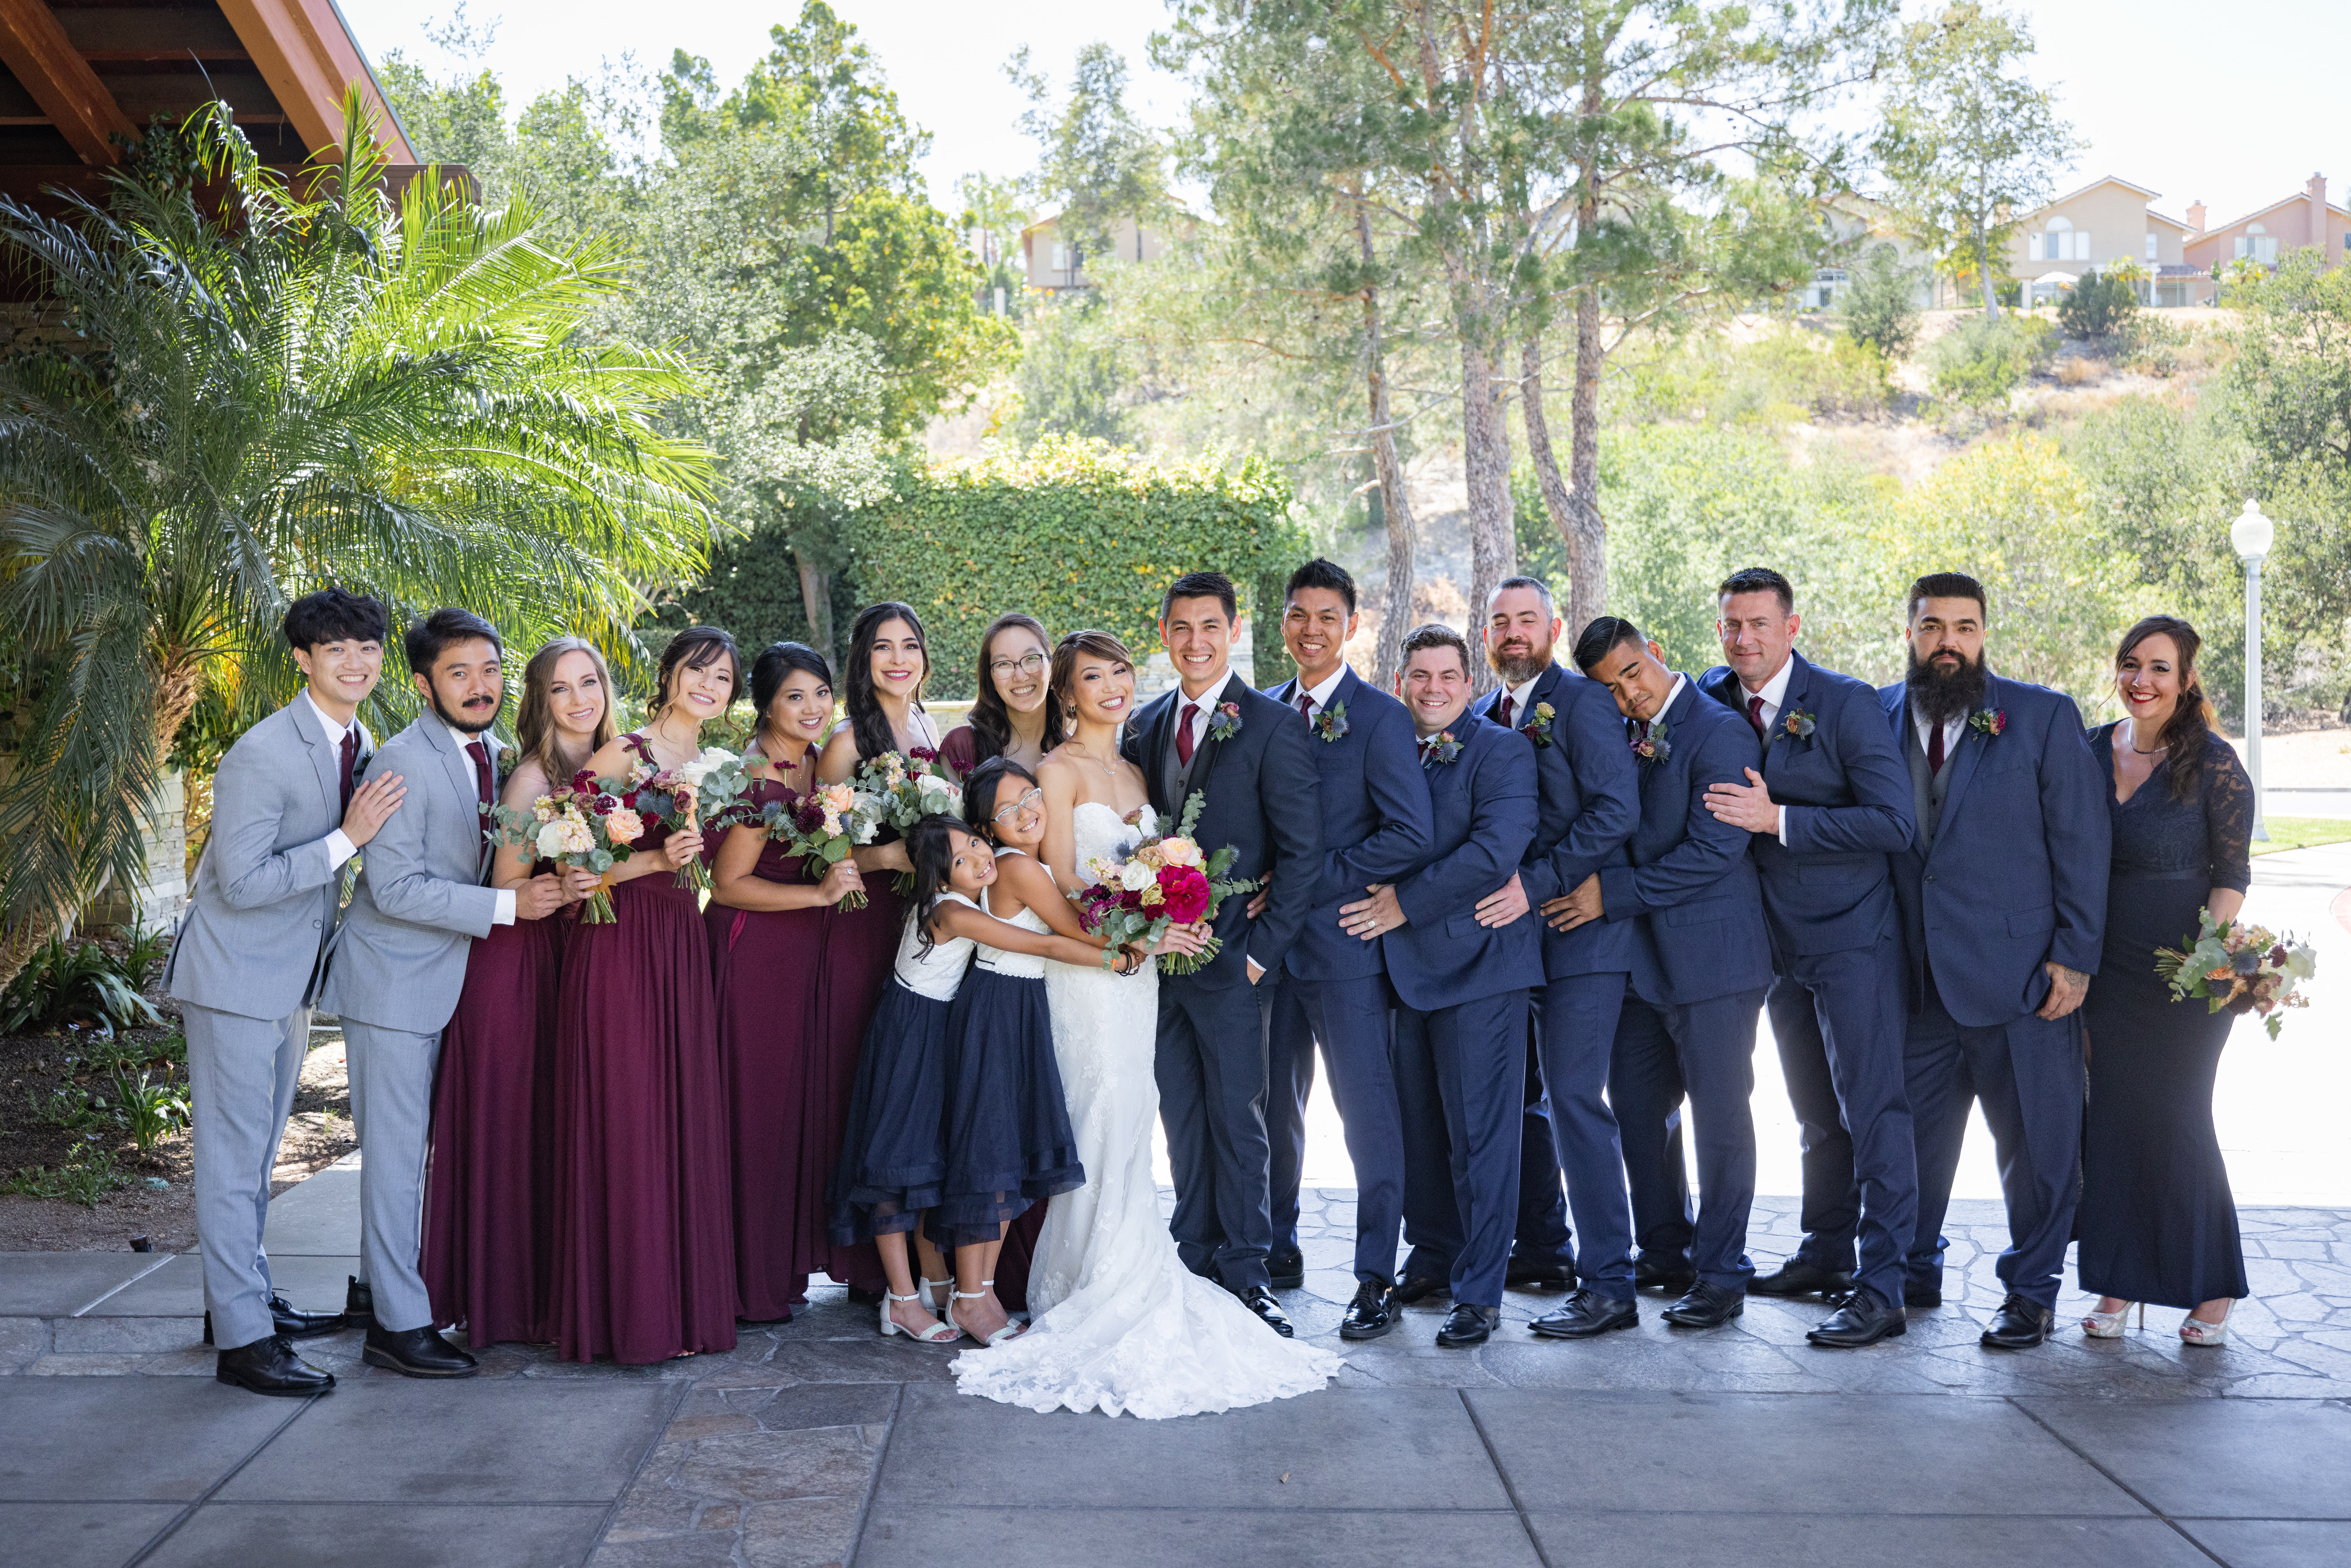 bride in strapless wedding dress and jewel toned bridal bouquet and groom in navy tuxedo suit with black lapels, grey vest and maroon tie stand with co-ed wedding party